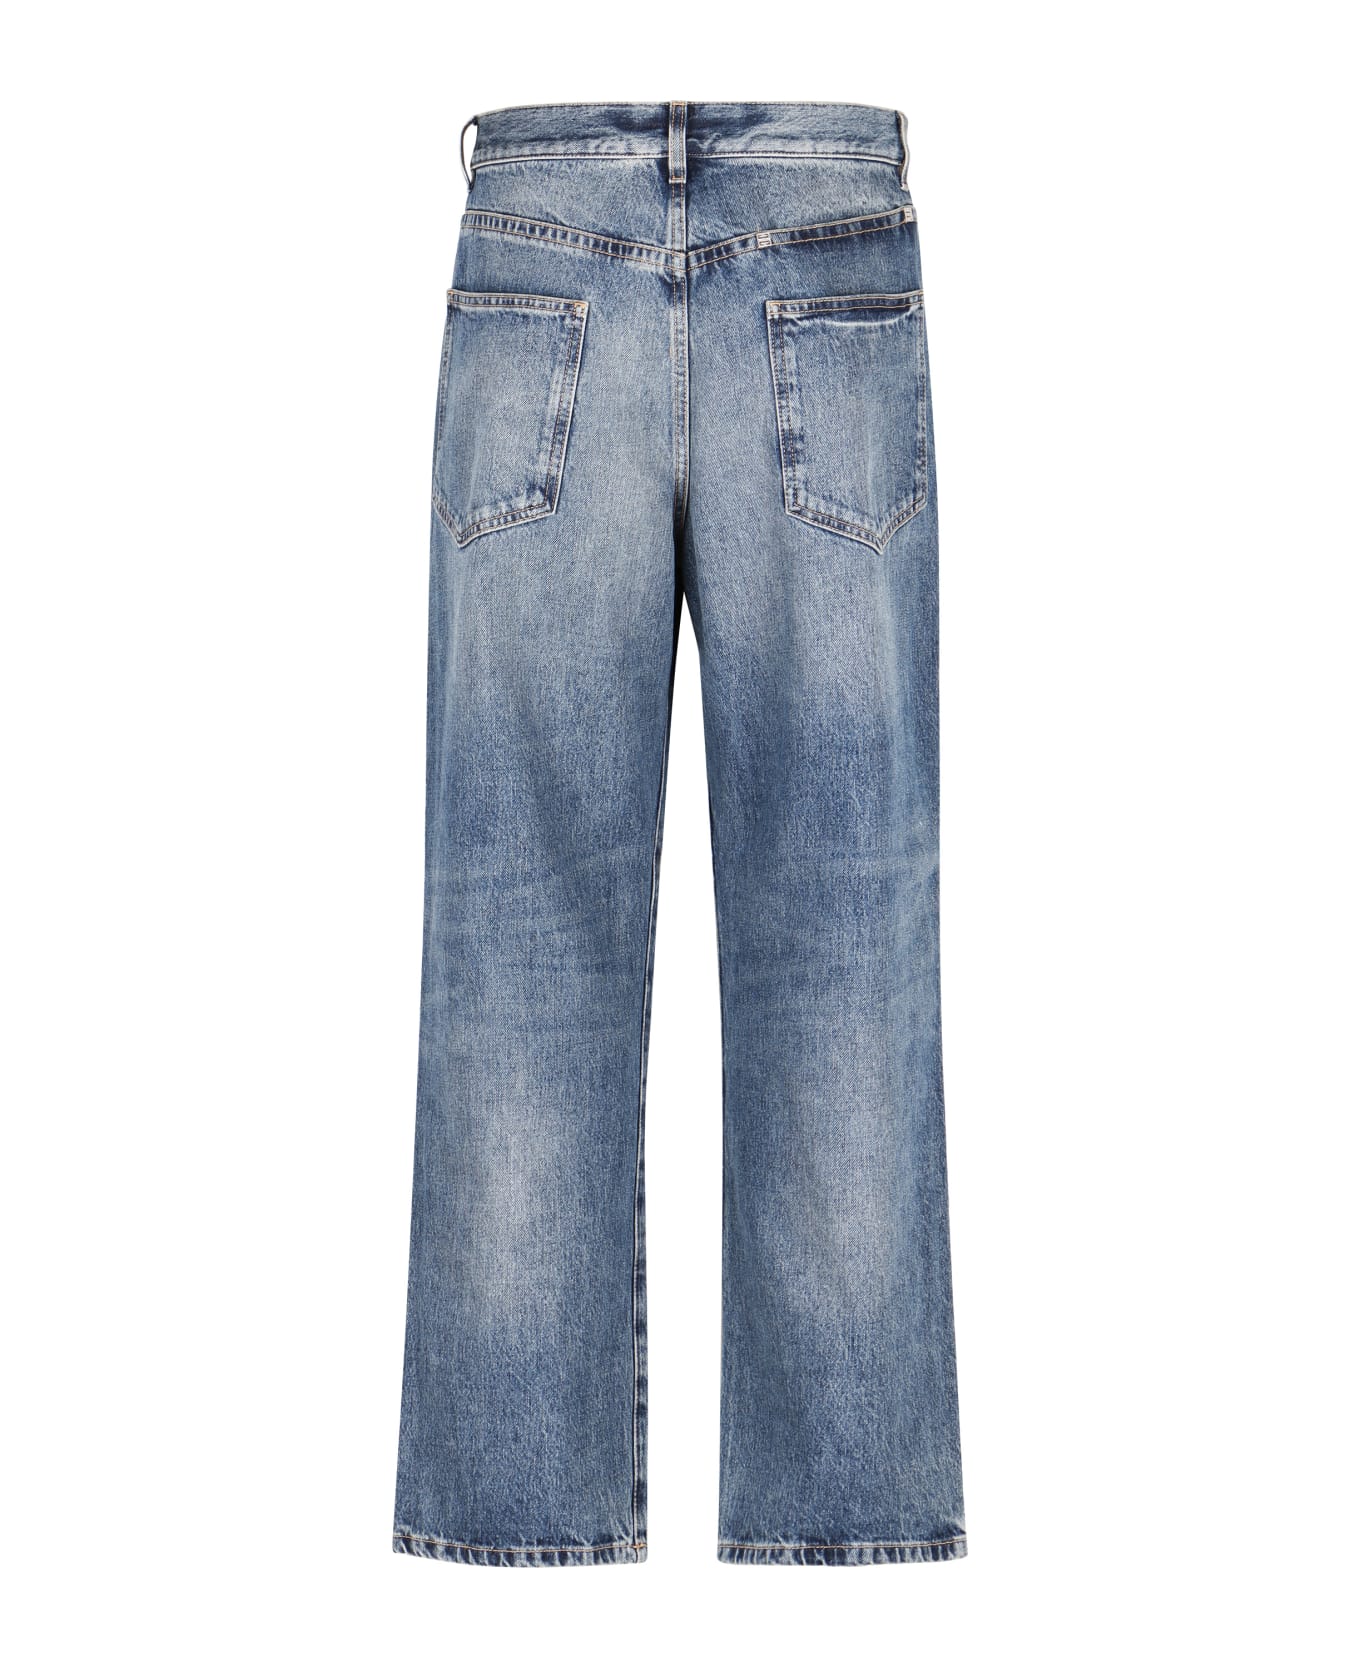 Givenchy Straight Leg Jeans - Blue